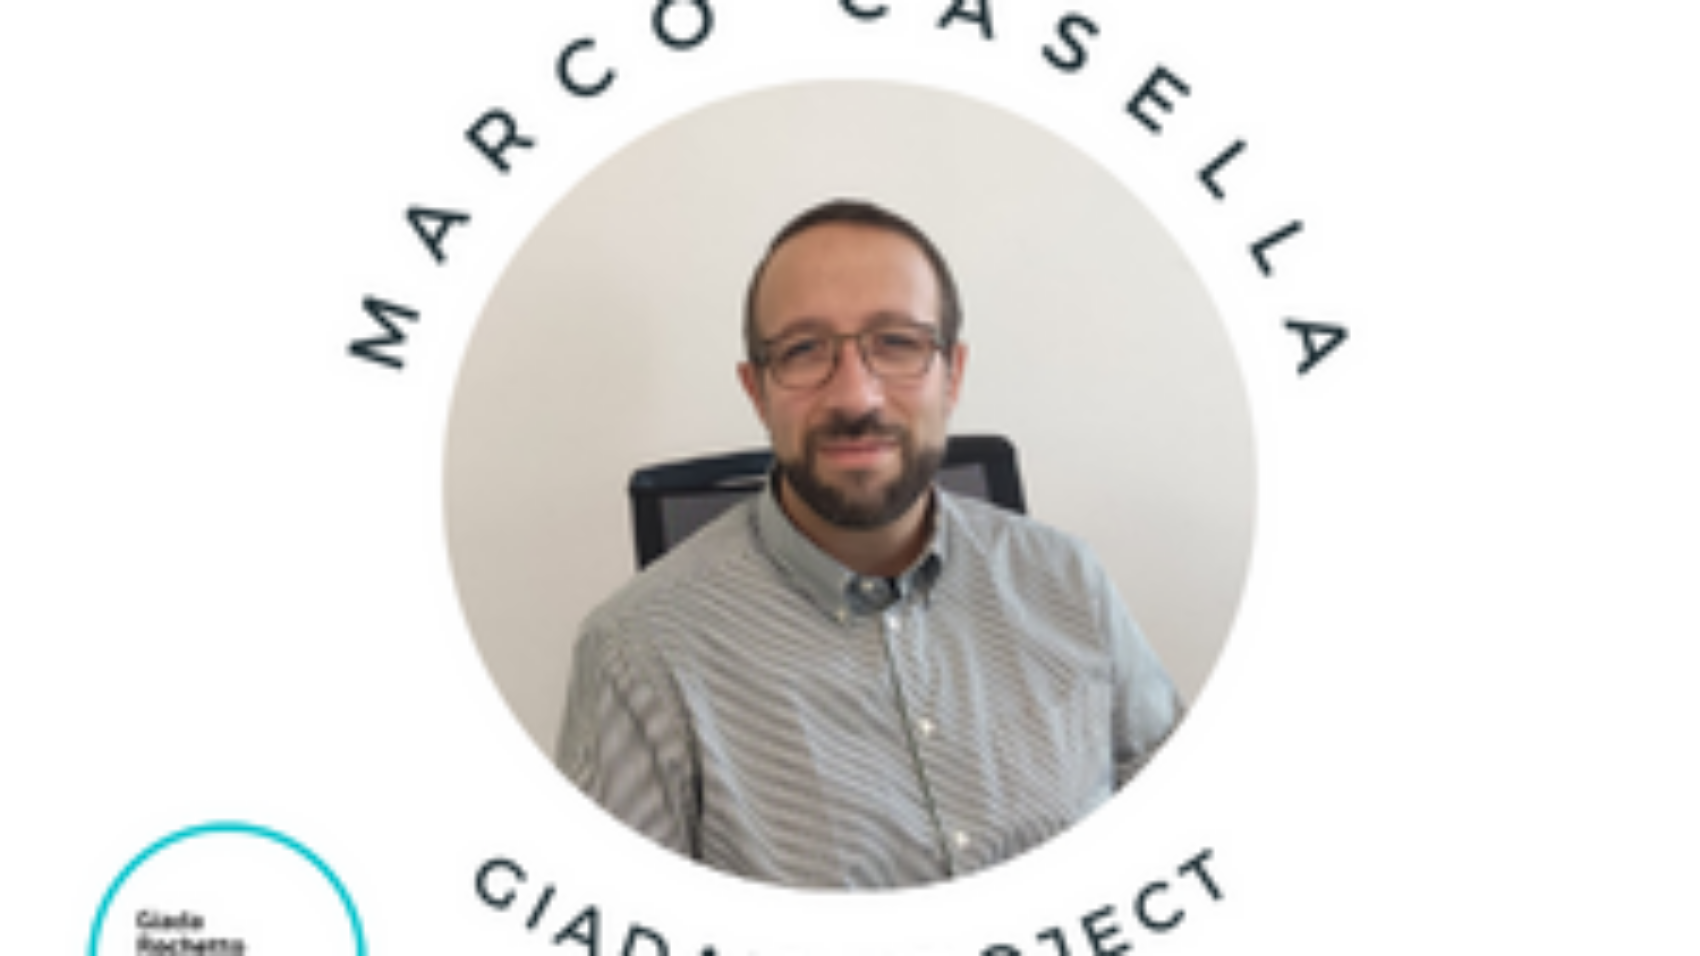 Marco Casella - HR Manager per Giada's Project